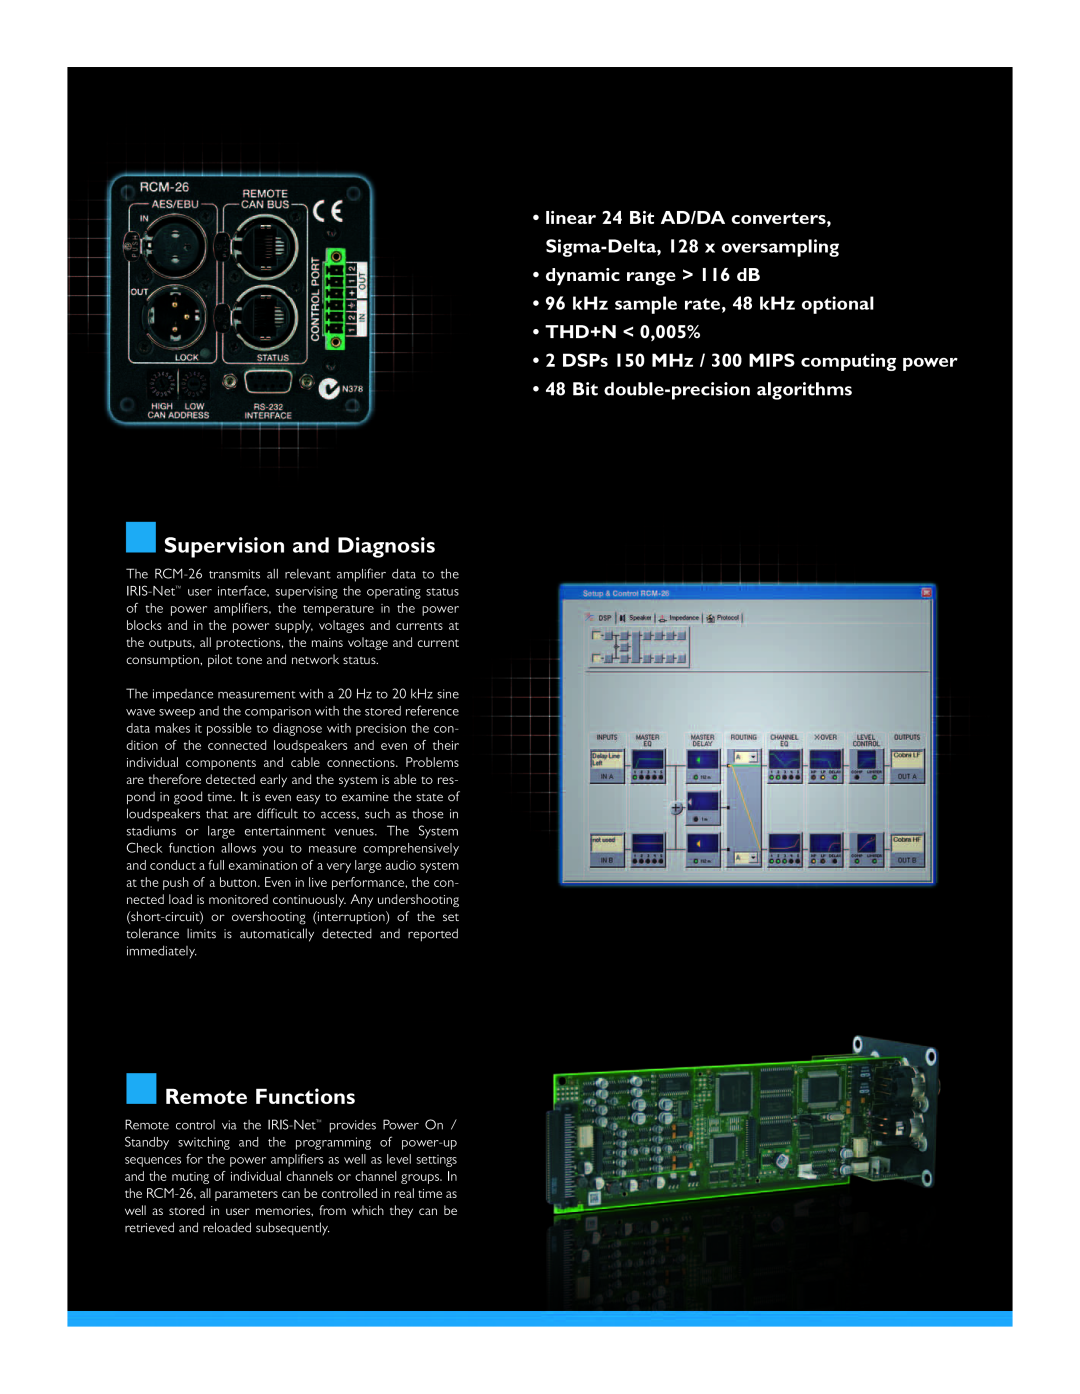 Dynacord PowerH Series manual Supervision and Diagnosis, Remote Functions, dynamic range > 116 dB, THD+N 0,005% 